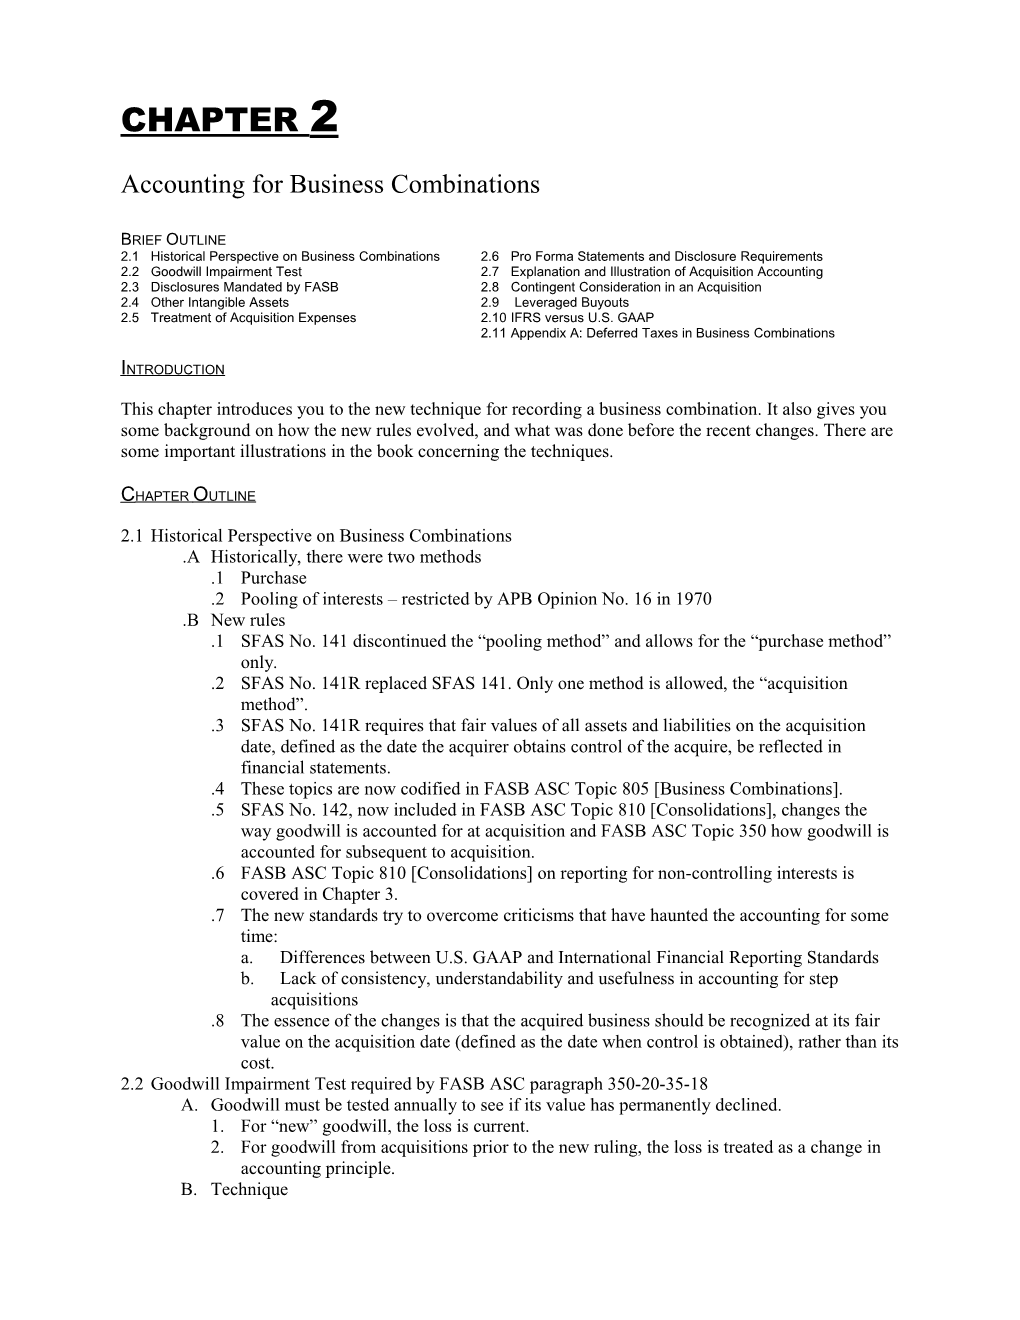 Accounting for Business Combinations s1